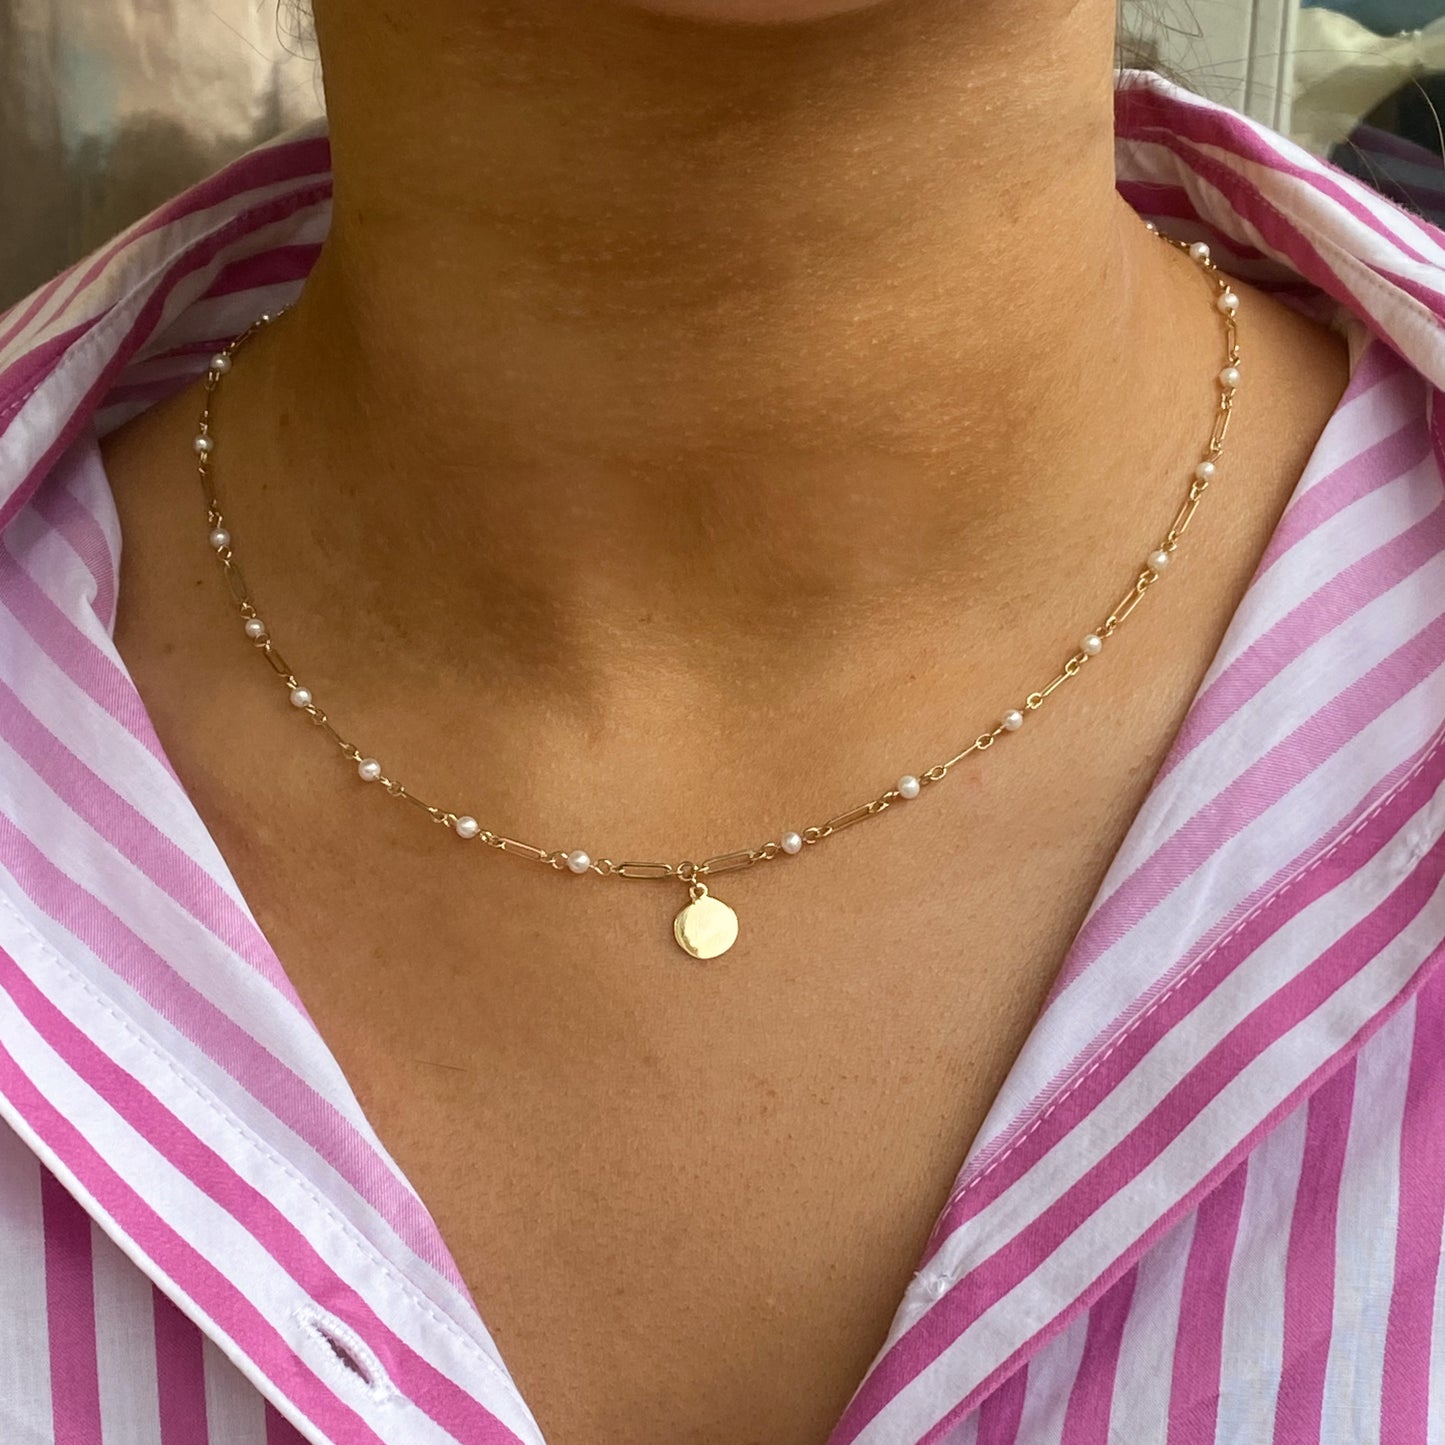 9ct Gold Freshwater Pearl & Paper Link Disc Necklace - John Ross Jewellers